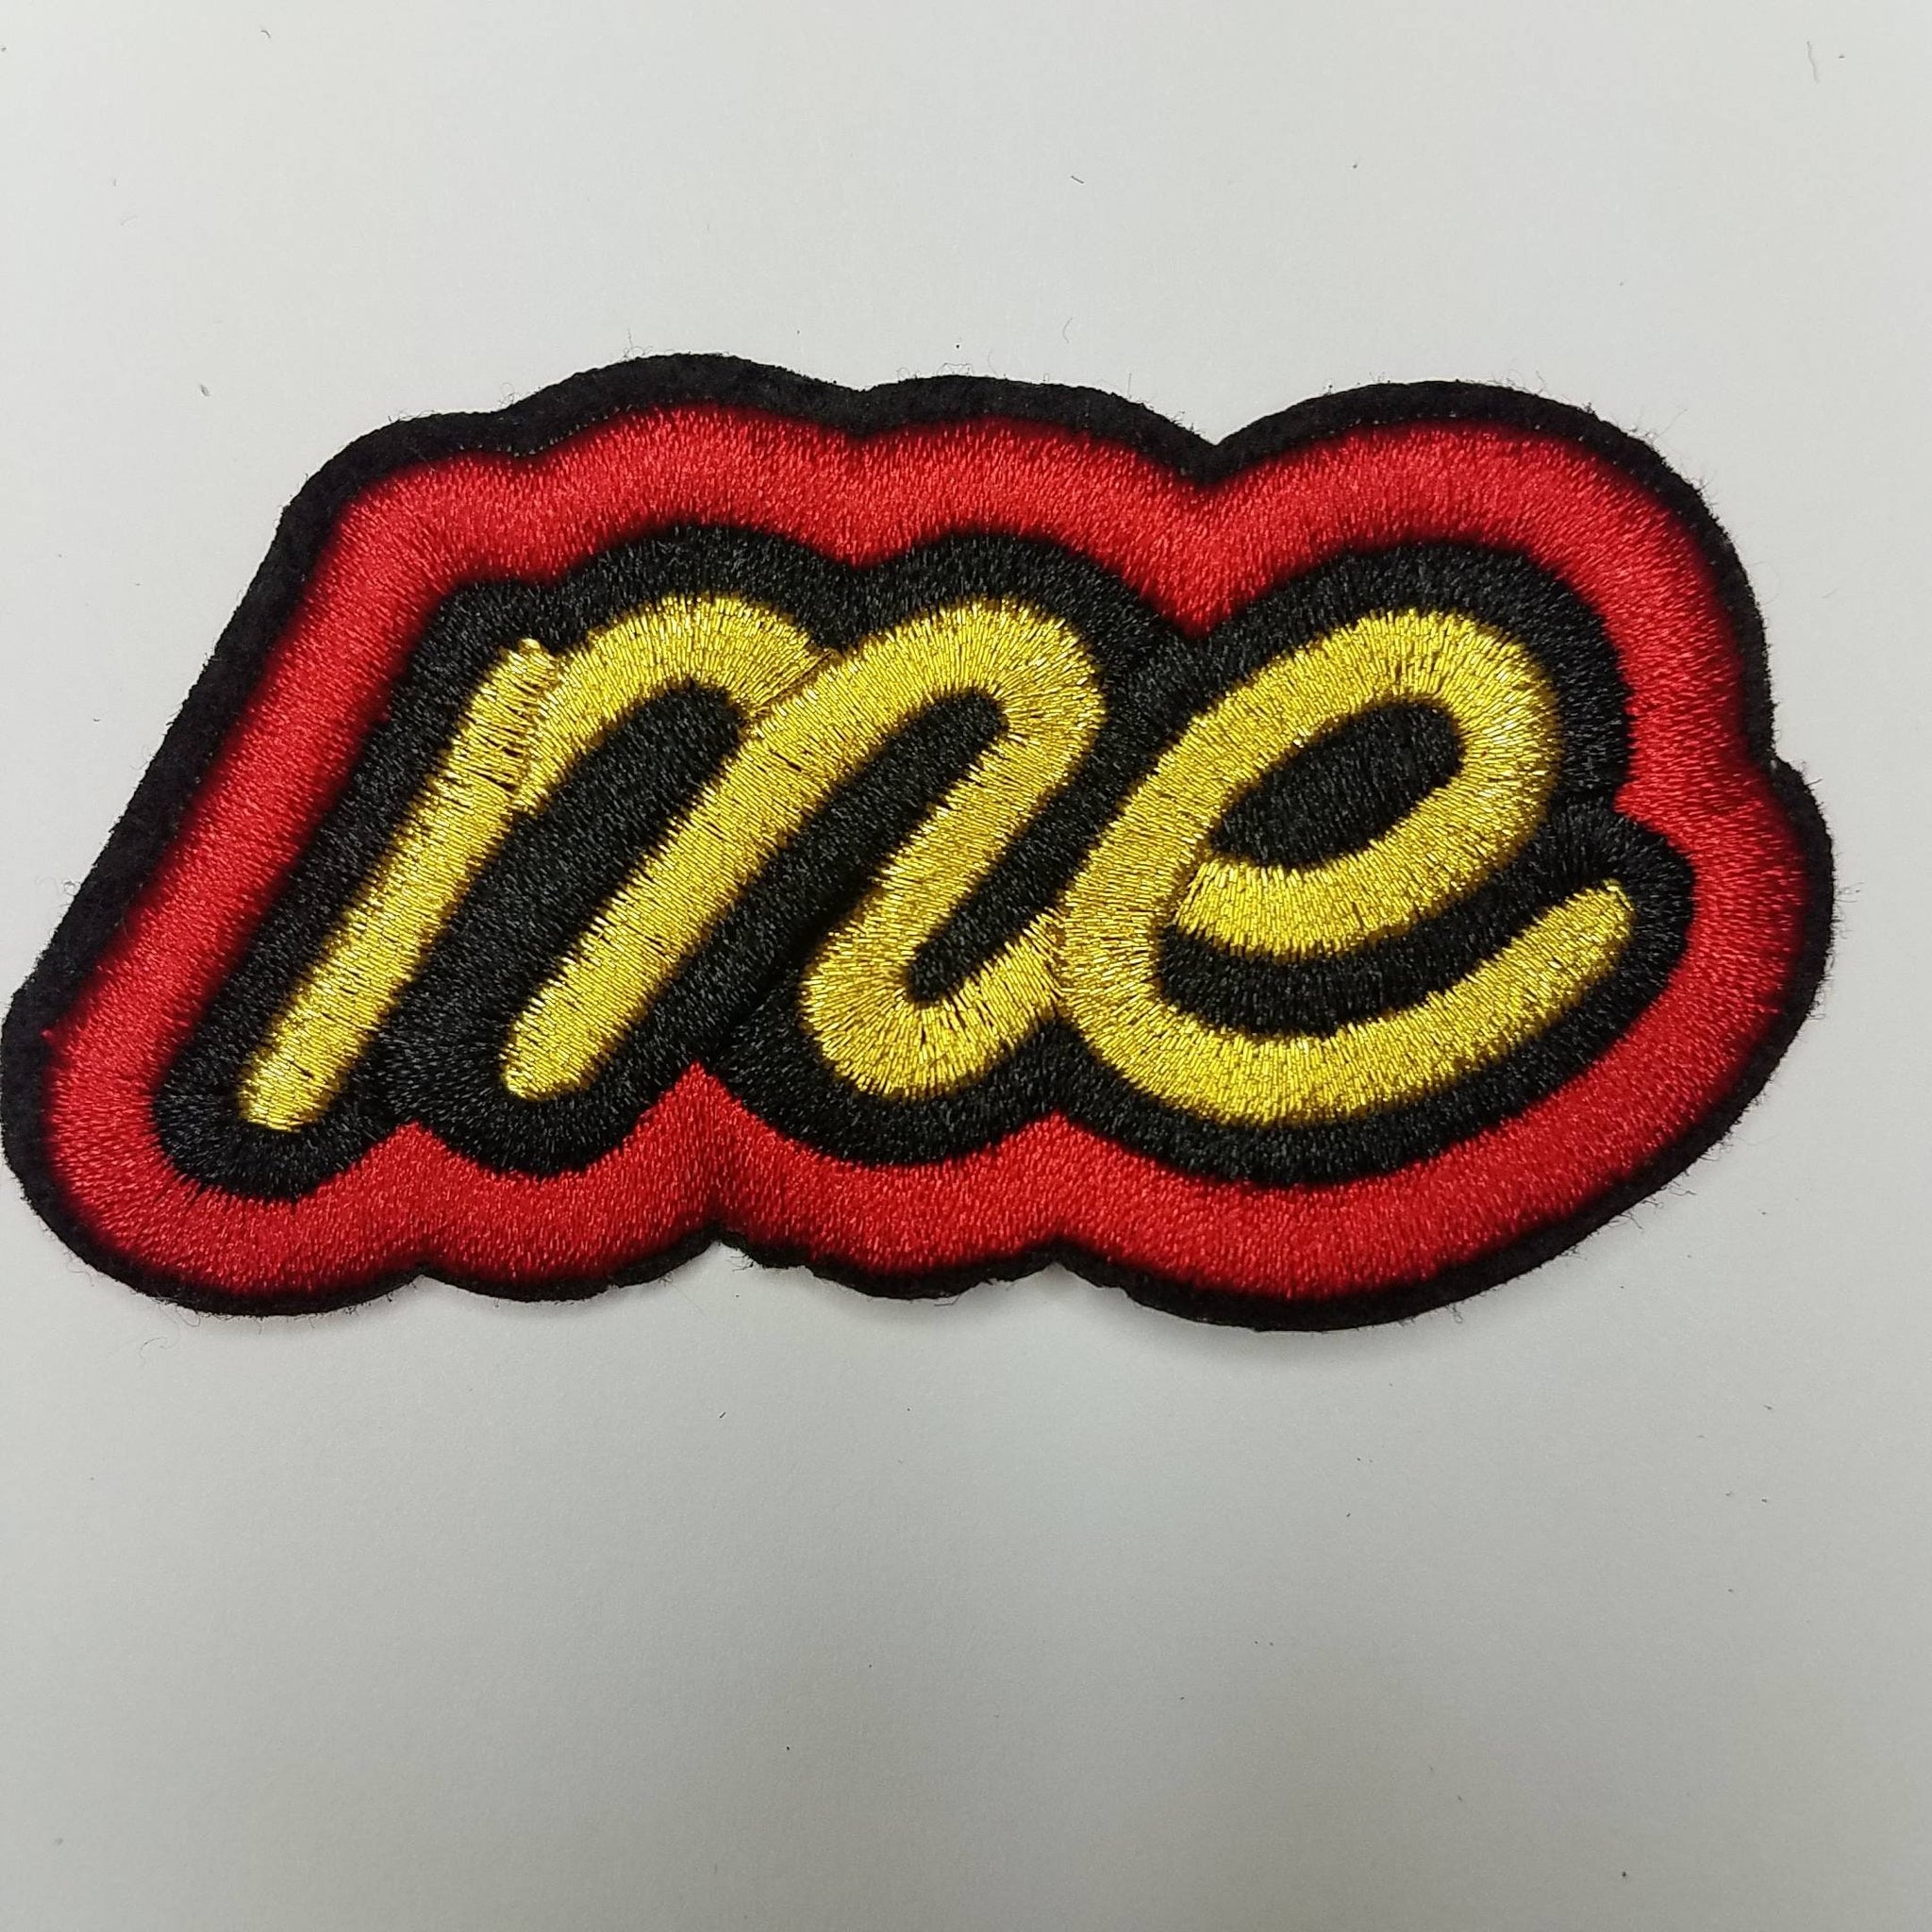 2-pc set, Metallic Me Patch, Gold, Black, and Red Iron-On